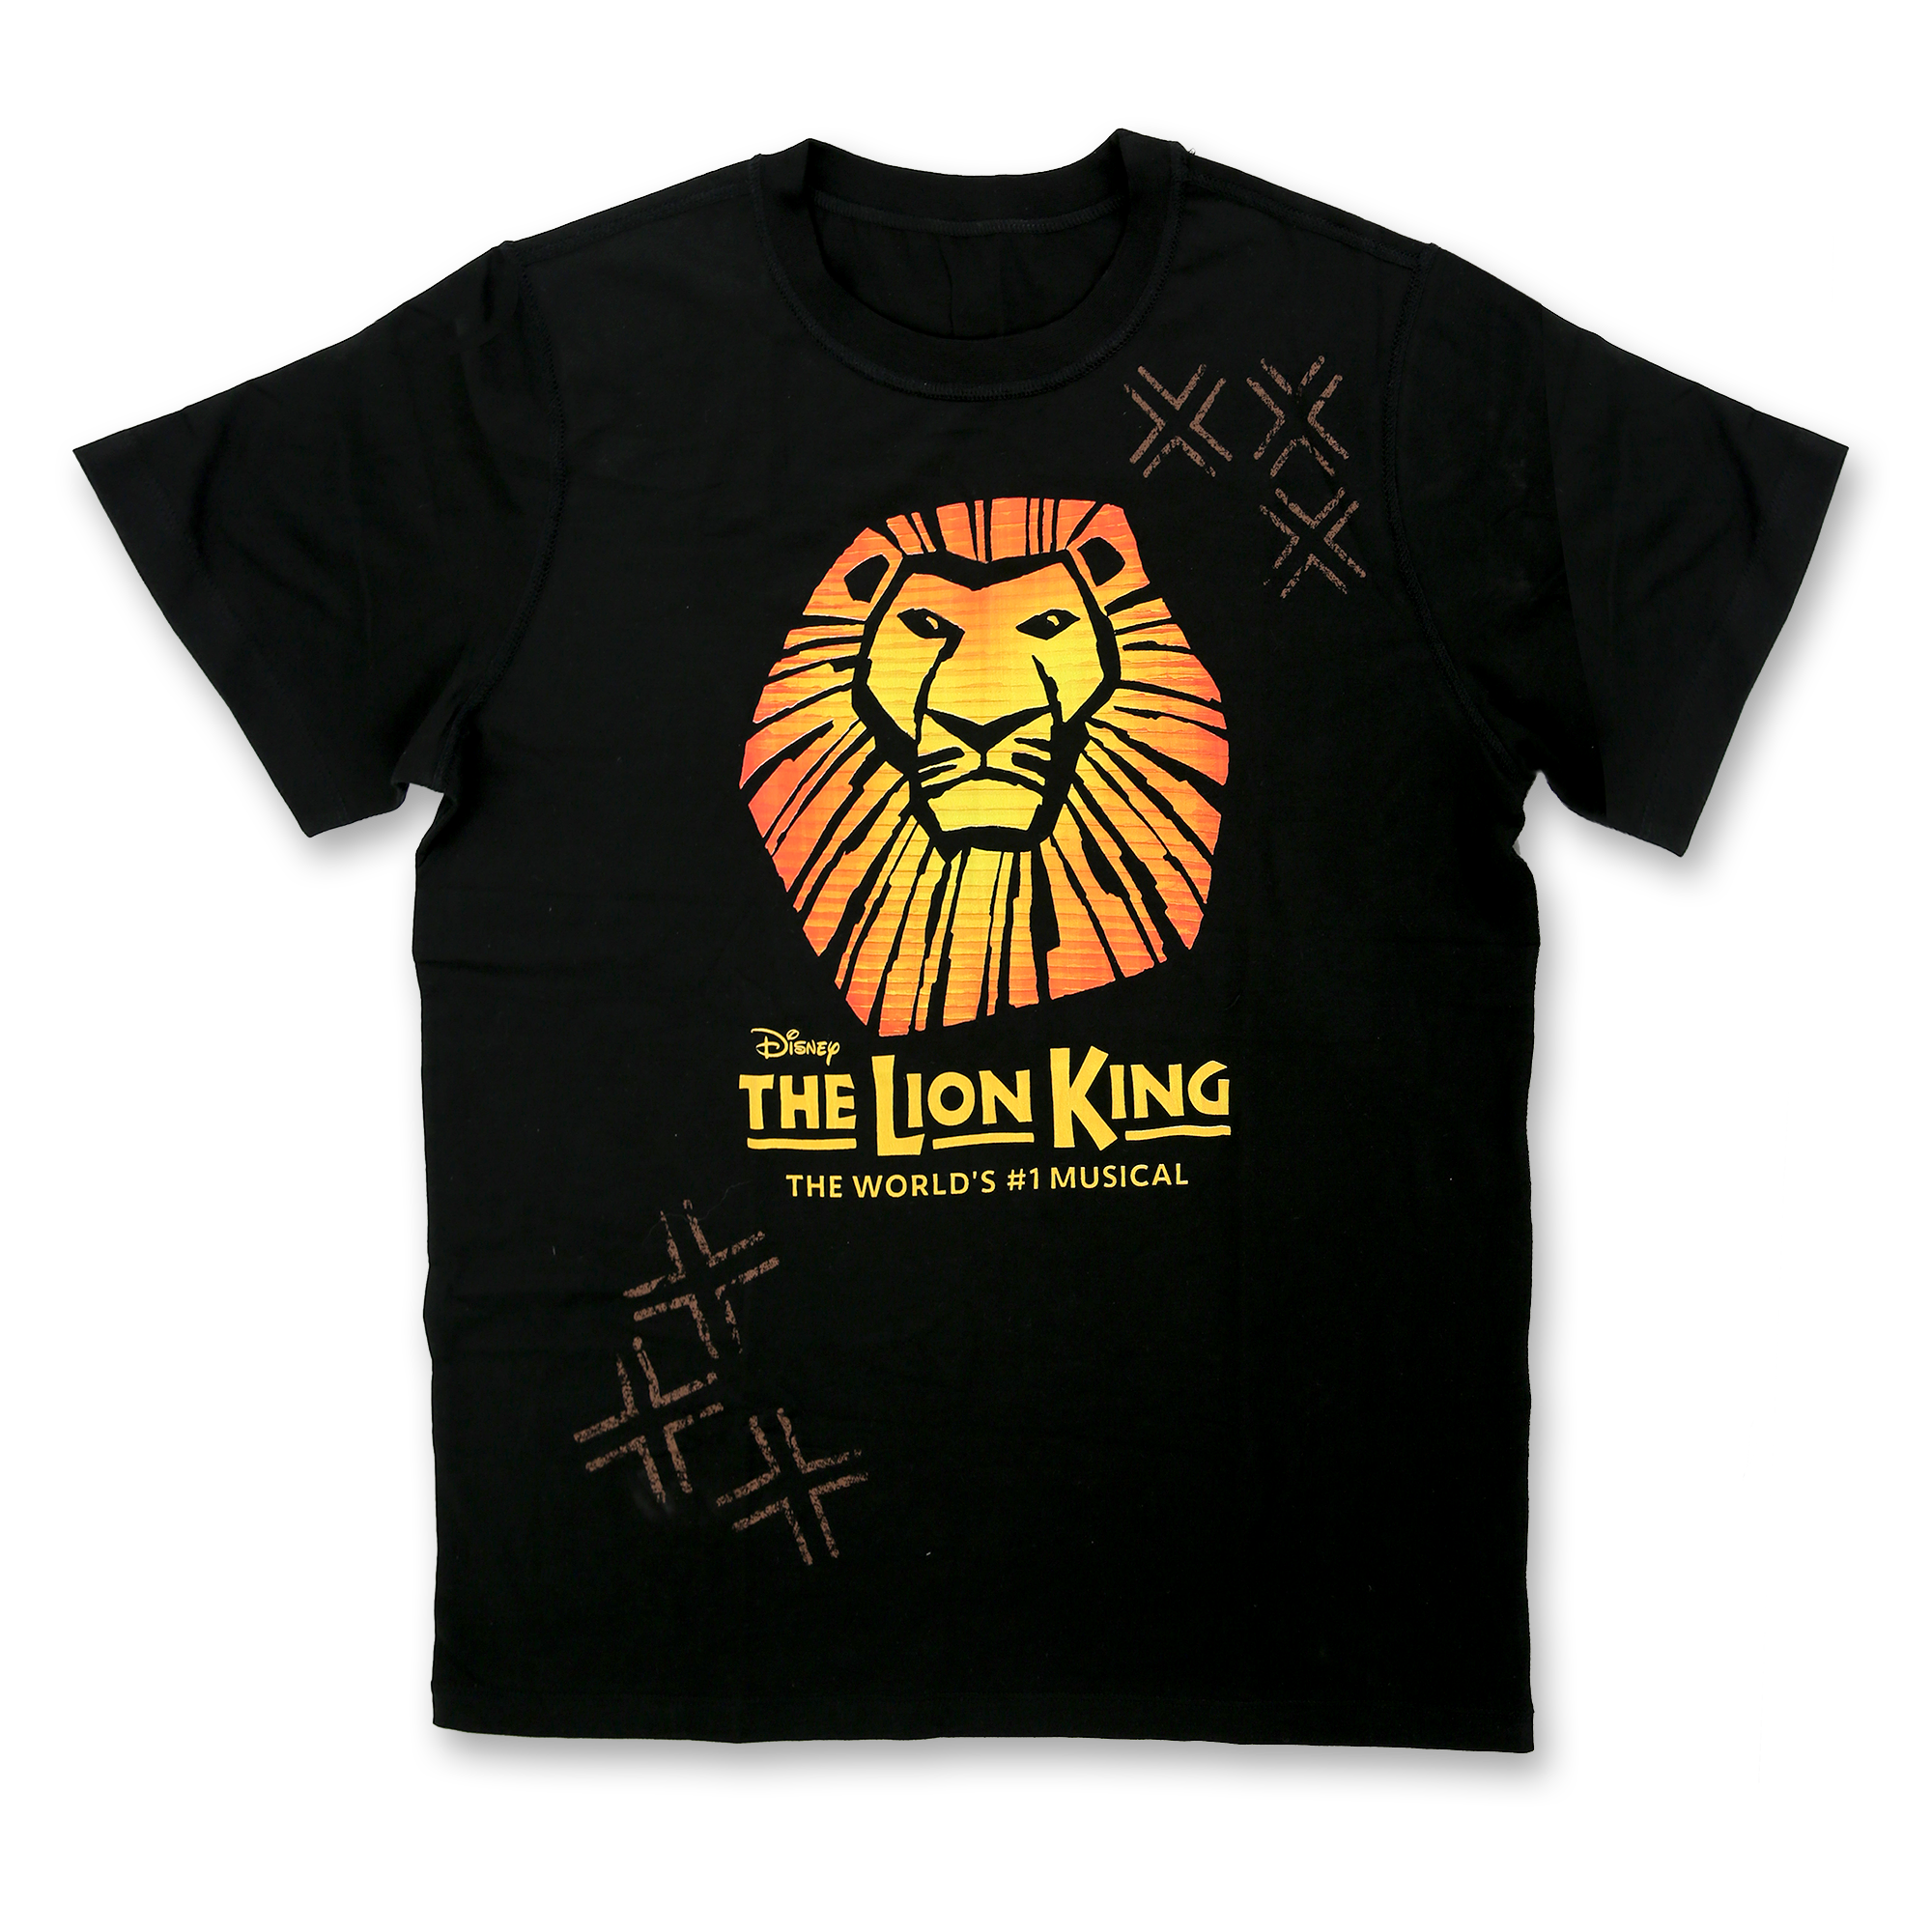 The Lion King the Broadway Musical - Sun Logo T-Shirt for Adults